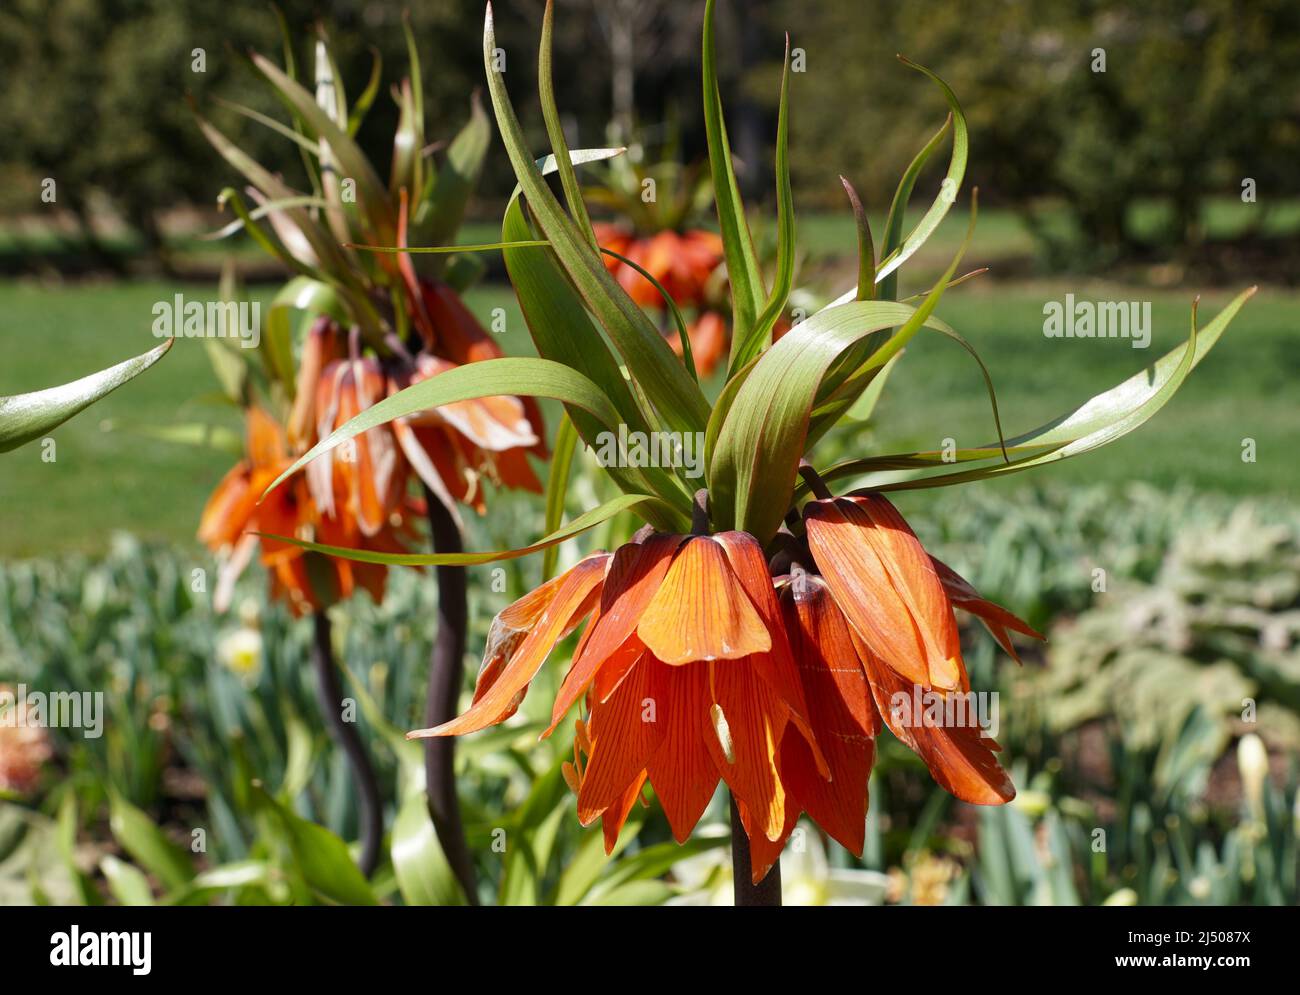 Orange color of Crown Imperial flowers, also known as Fritillaria Imperialis, blooming in early Spring Stock Photo